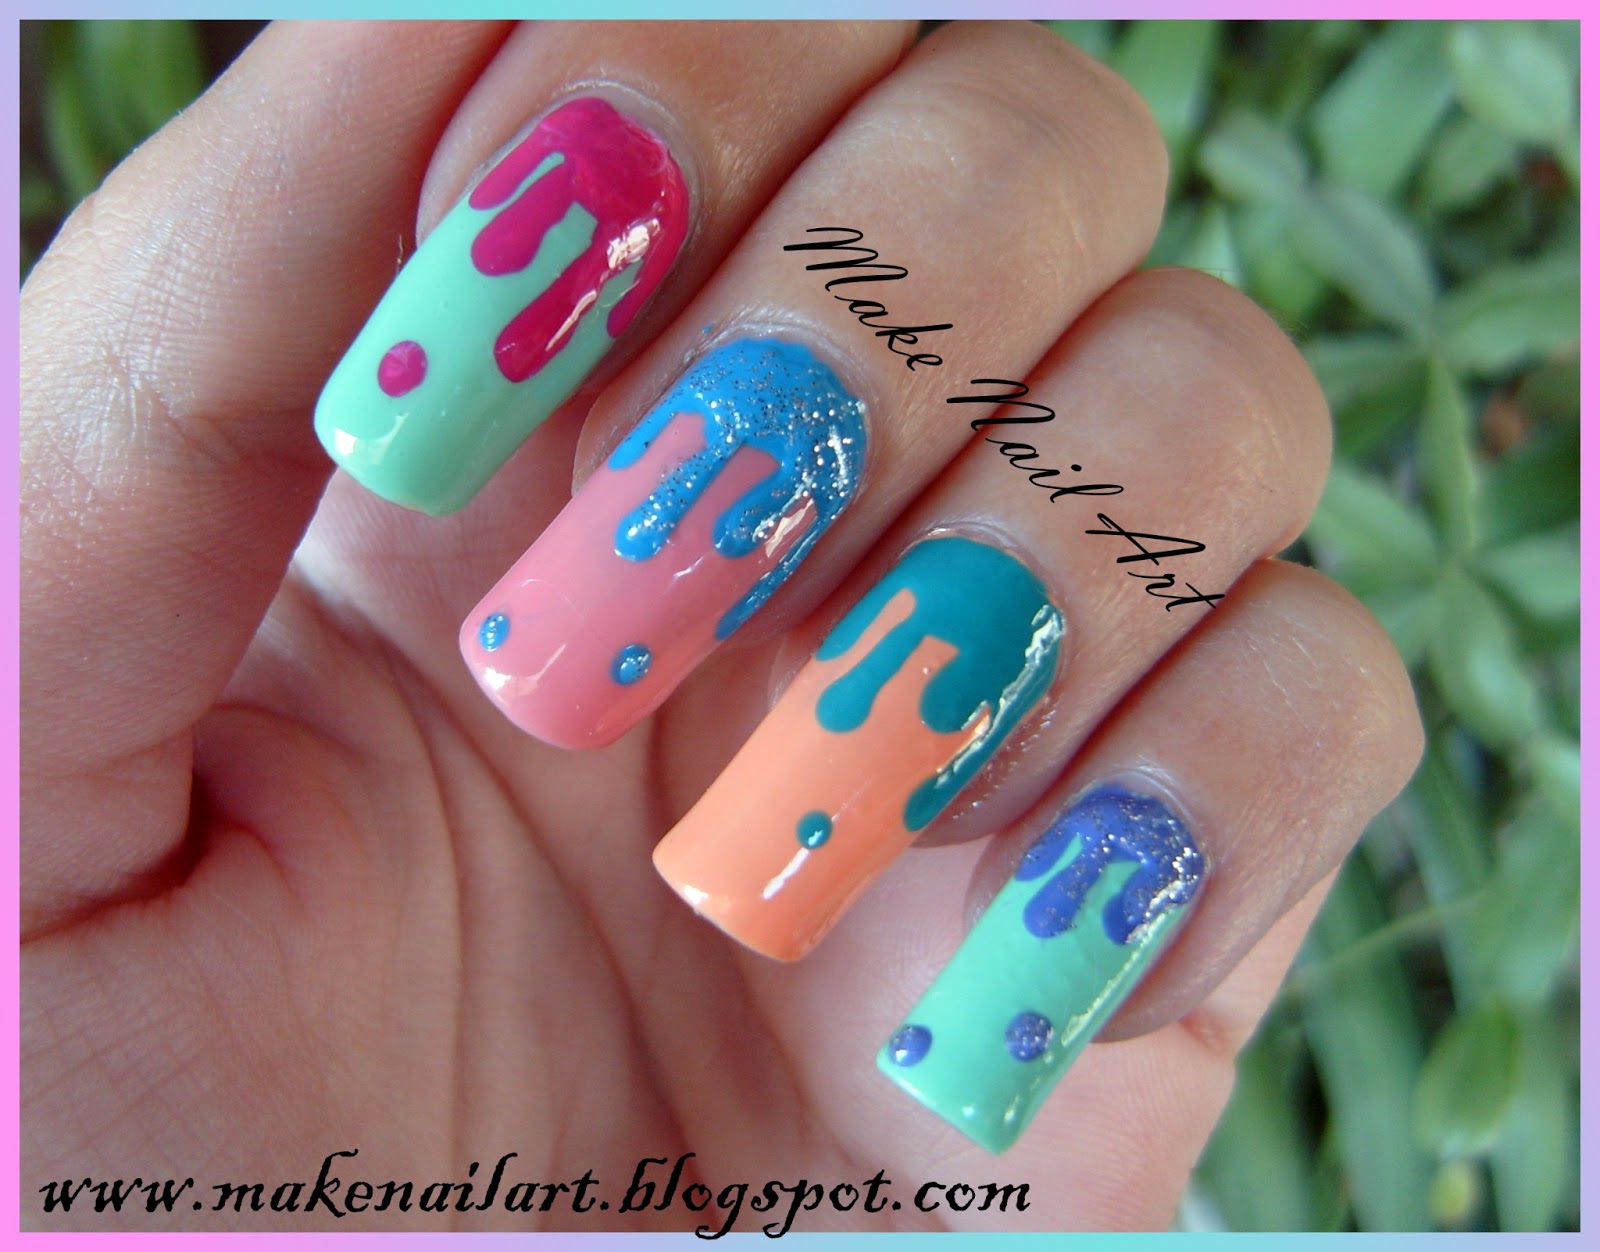 Poster Paint Nail Art Tutorial - wide 1